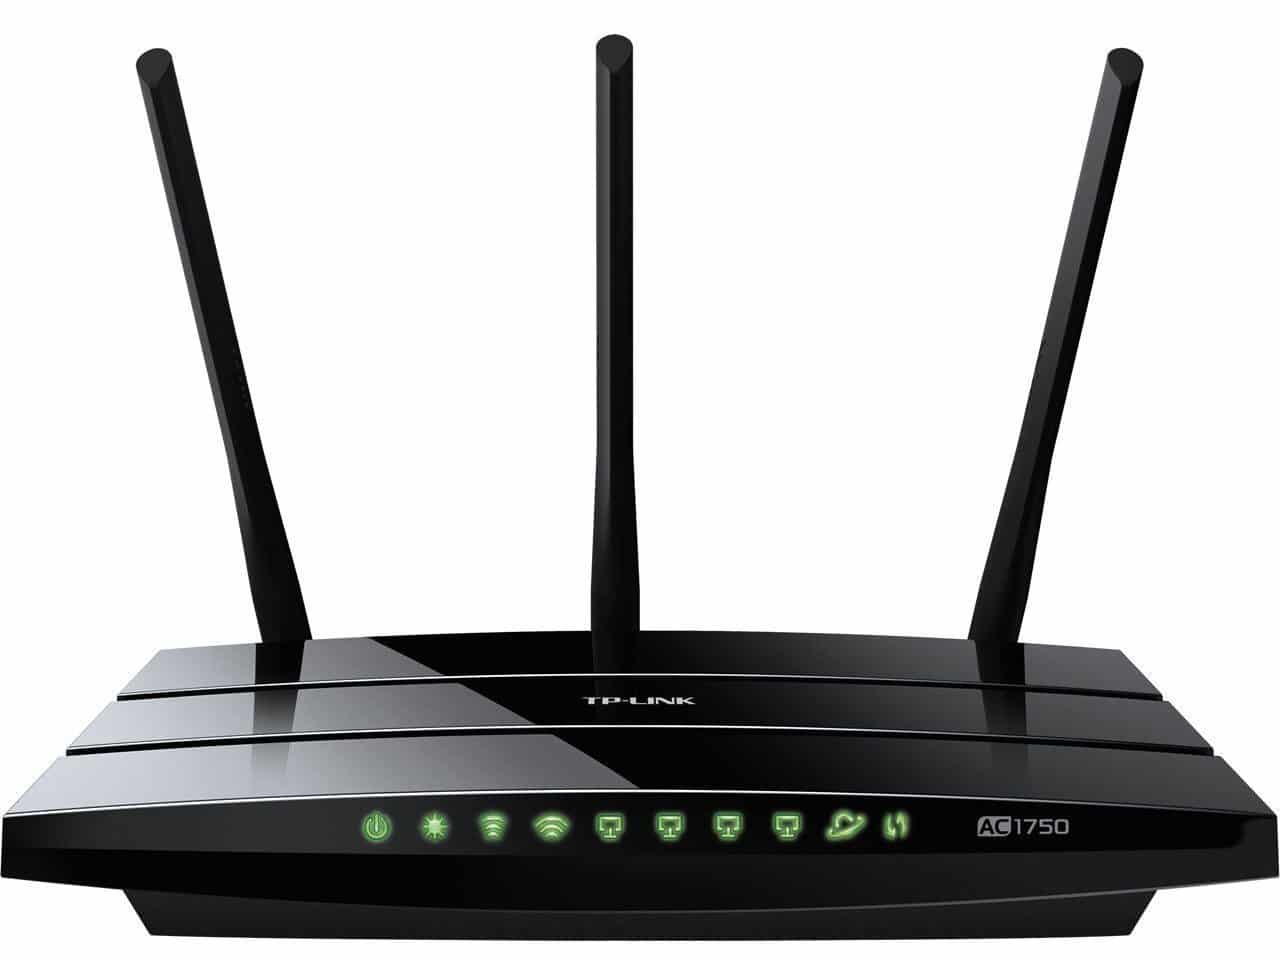 10 Best Wireless Router Reviews 2018 – Smart Routers for Gaming